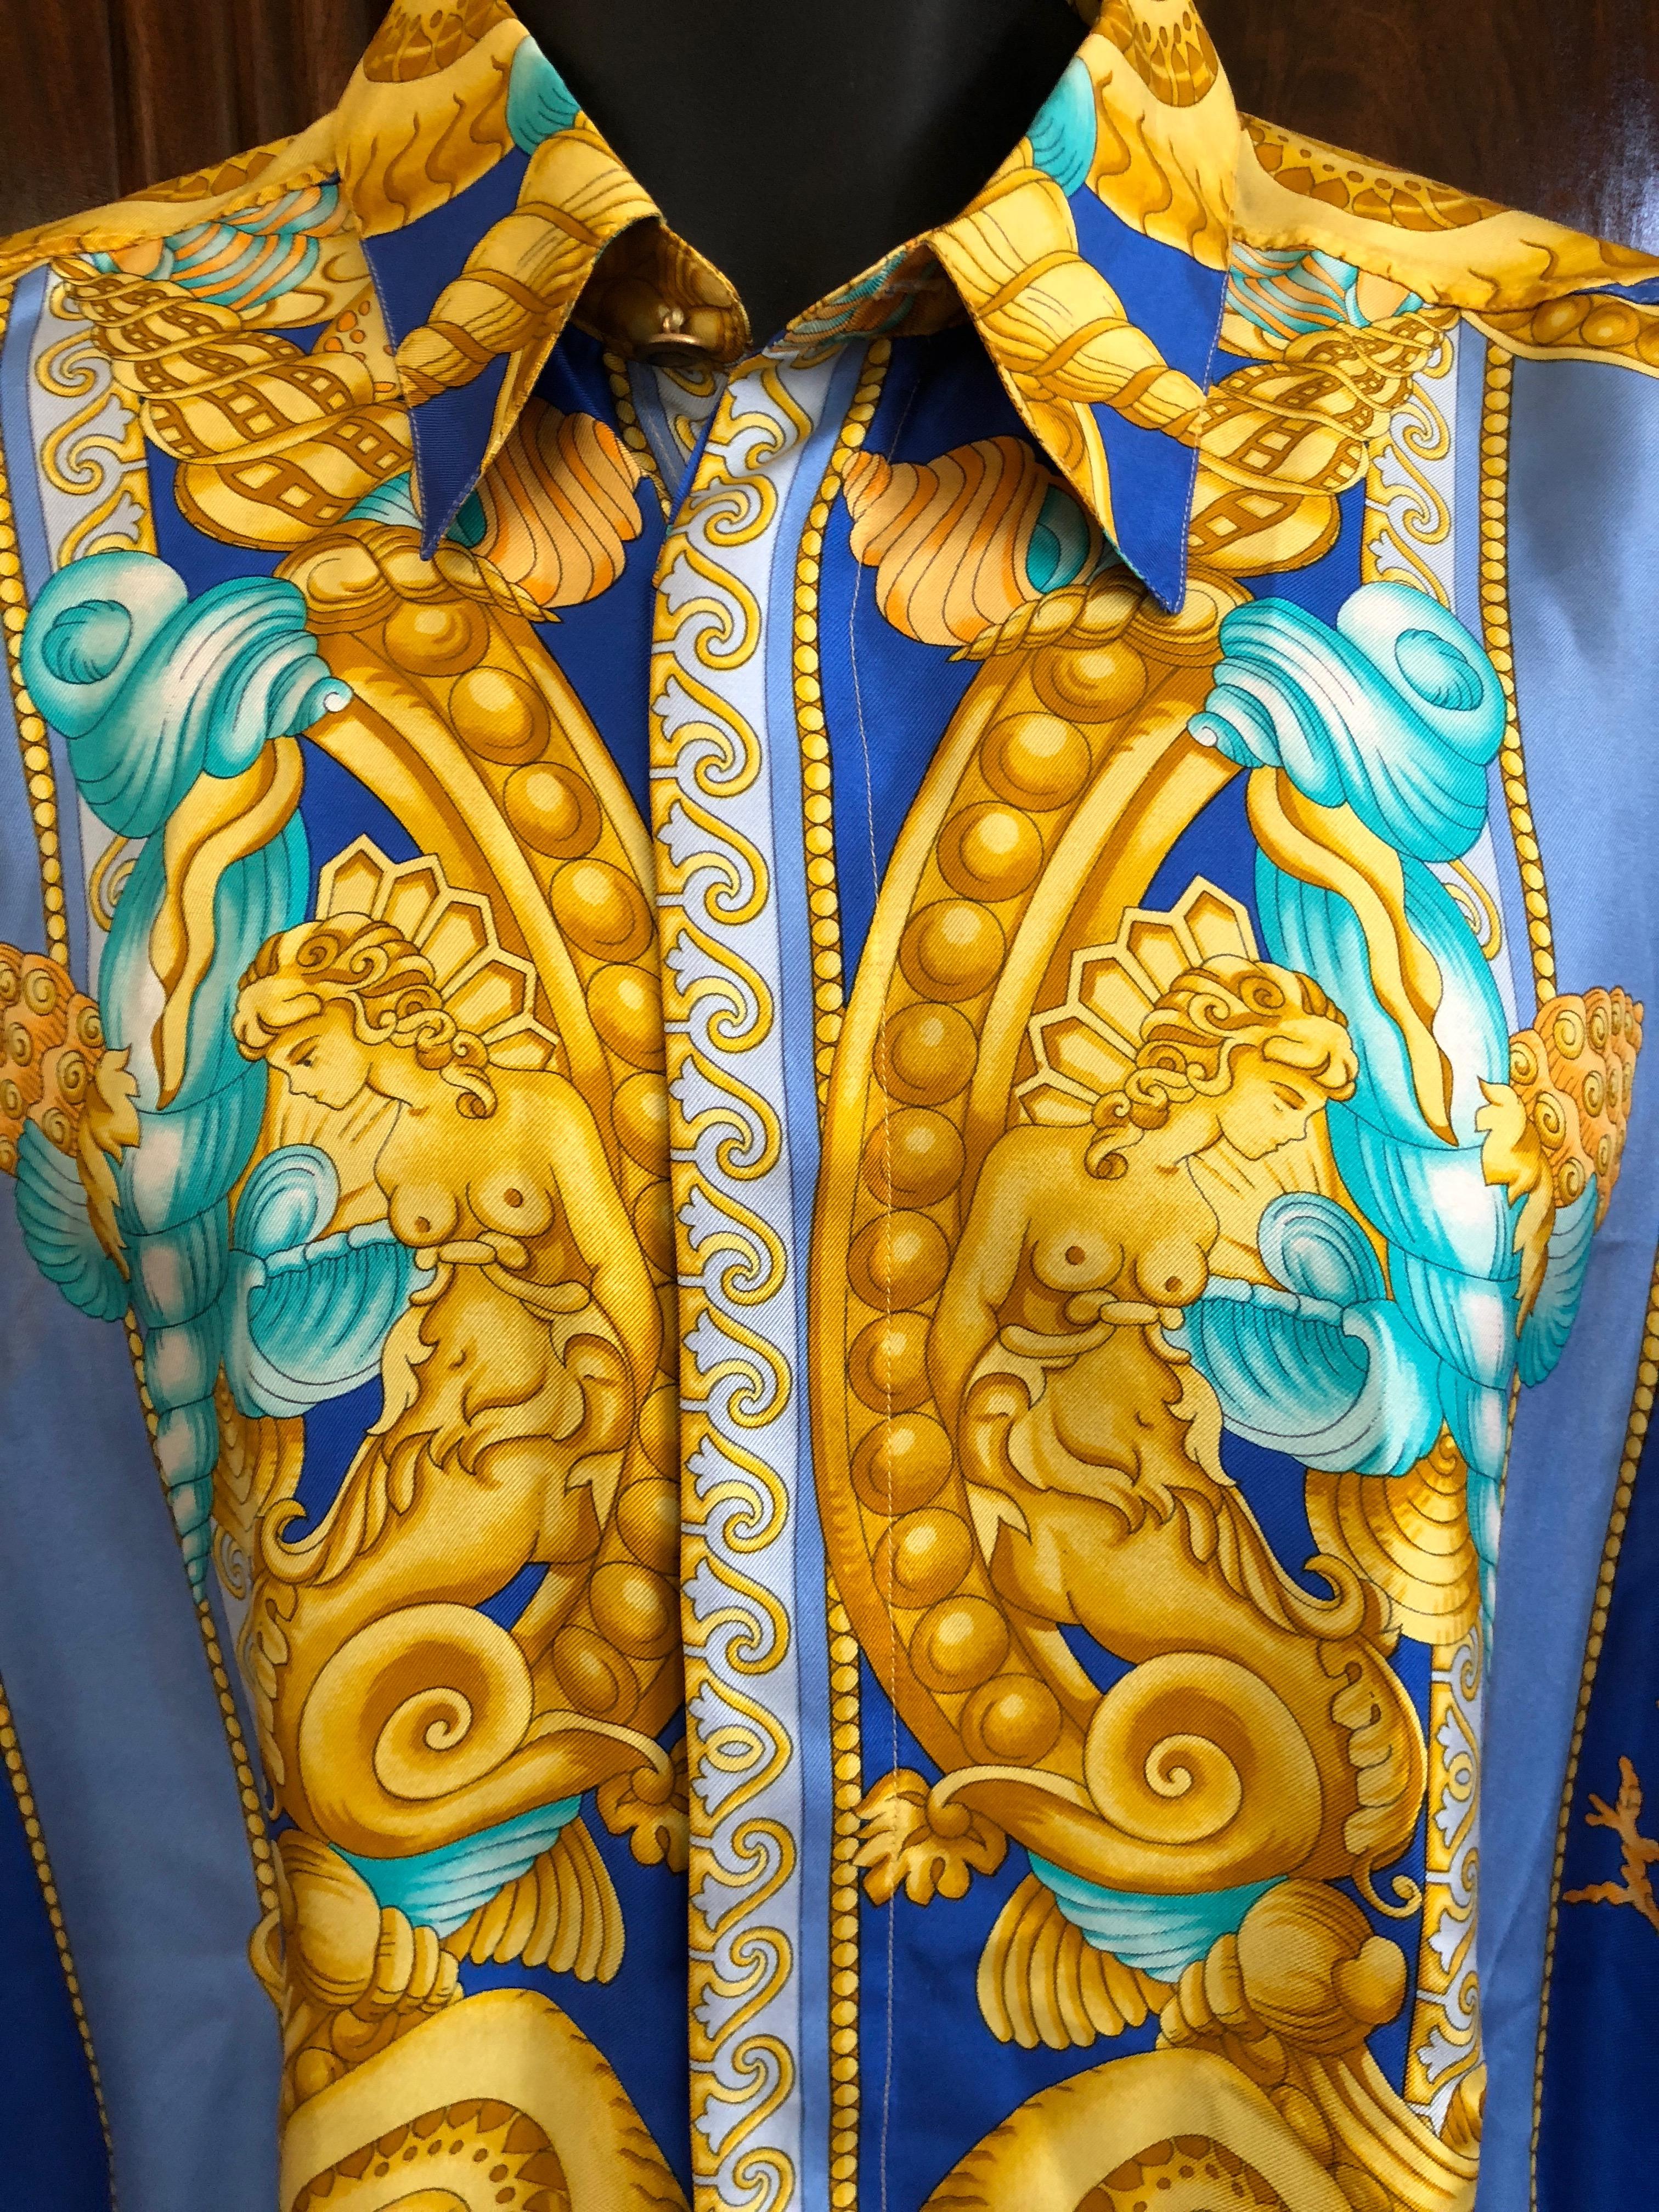 V2 Gianni Versace1998 Rare Iconic Sea Shell Baroque Siren 100% Silk Shirt .
This is such a beautiful piece a classic. Original buttons are intact.
Size XL
Measurements ;
Chest 52